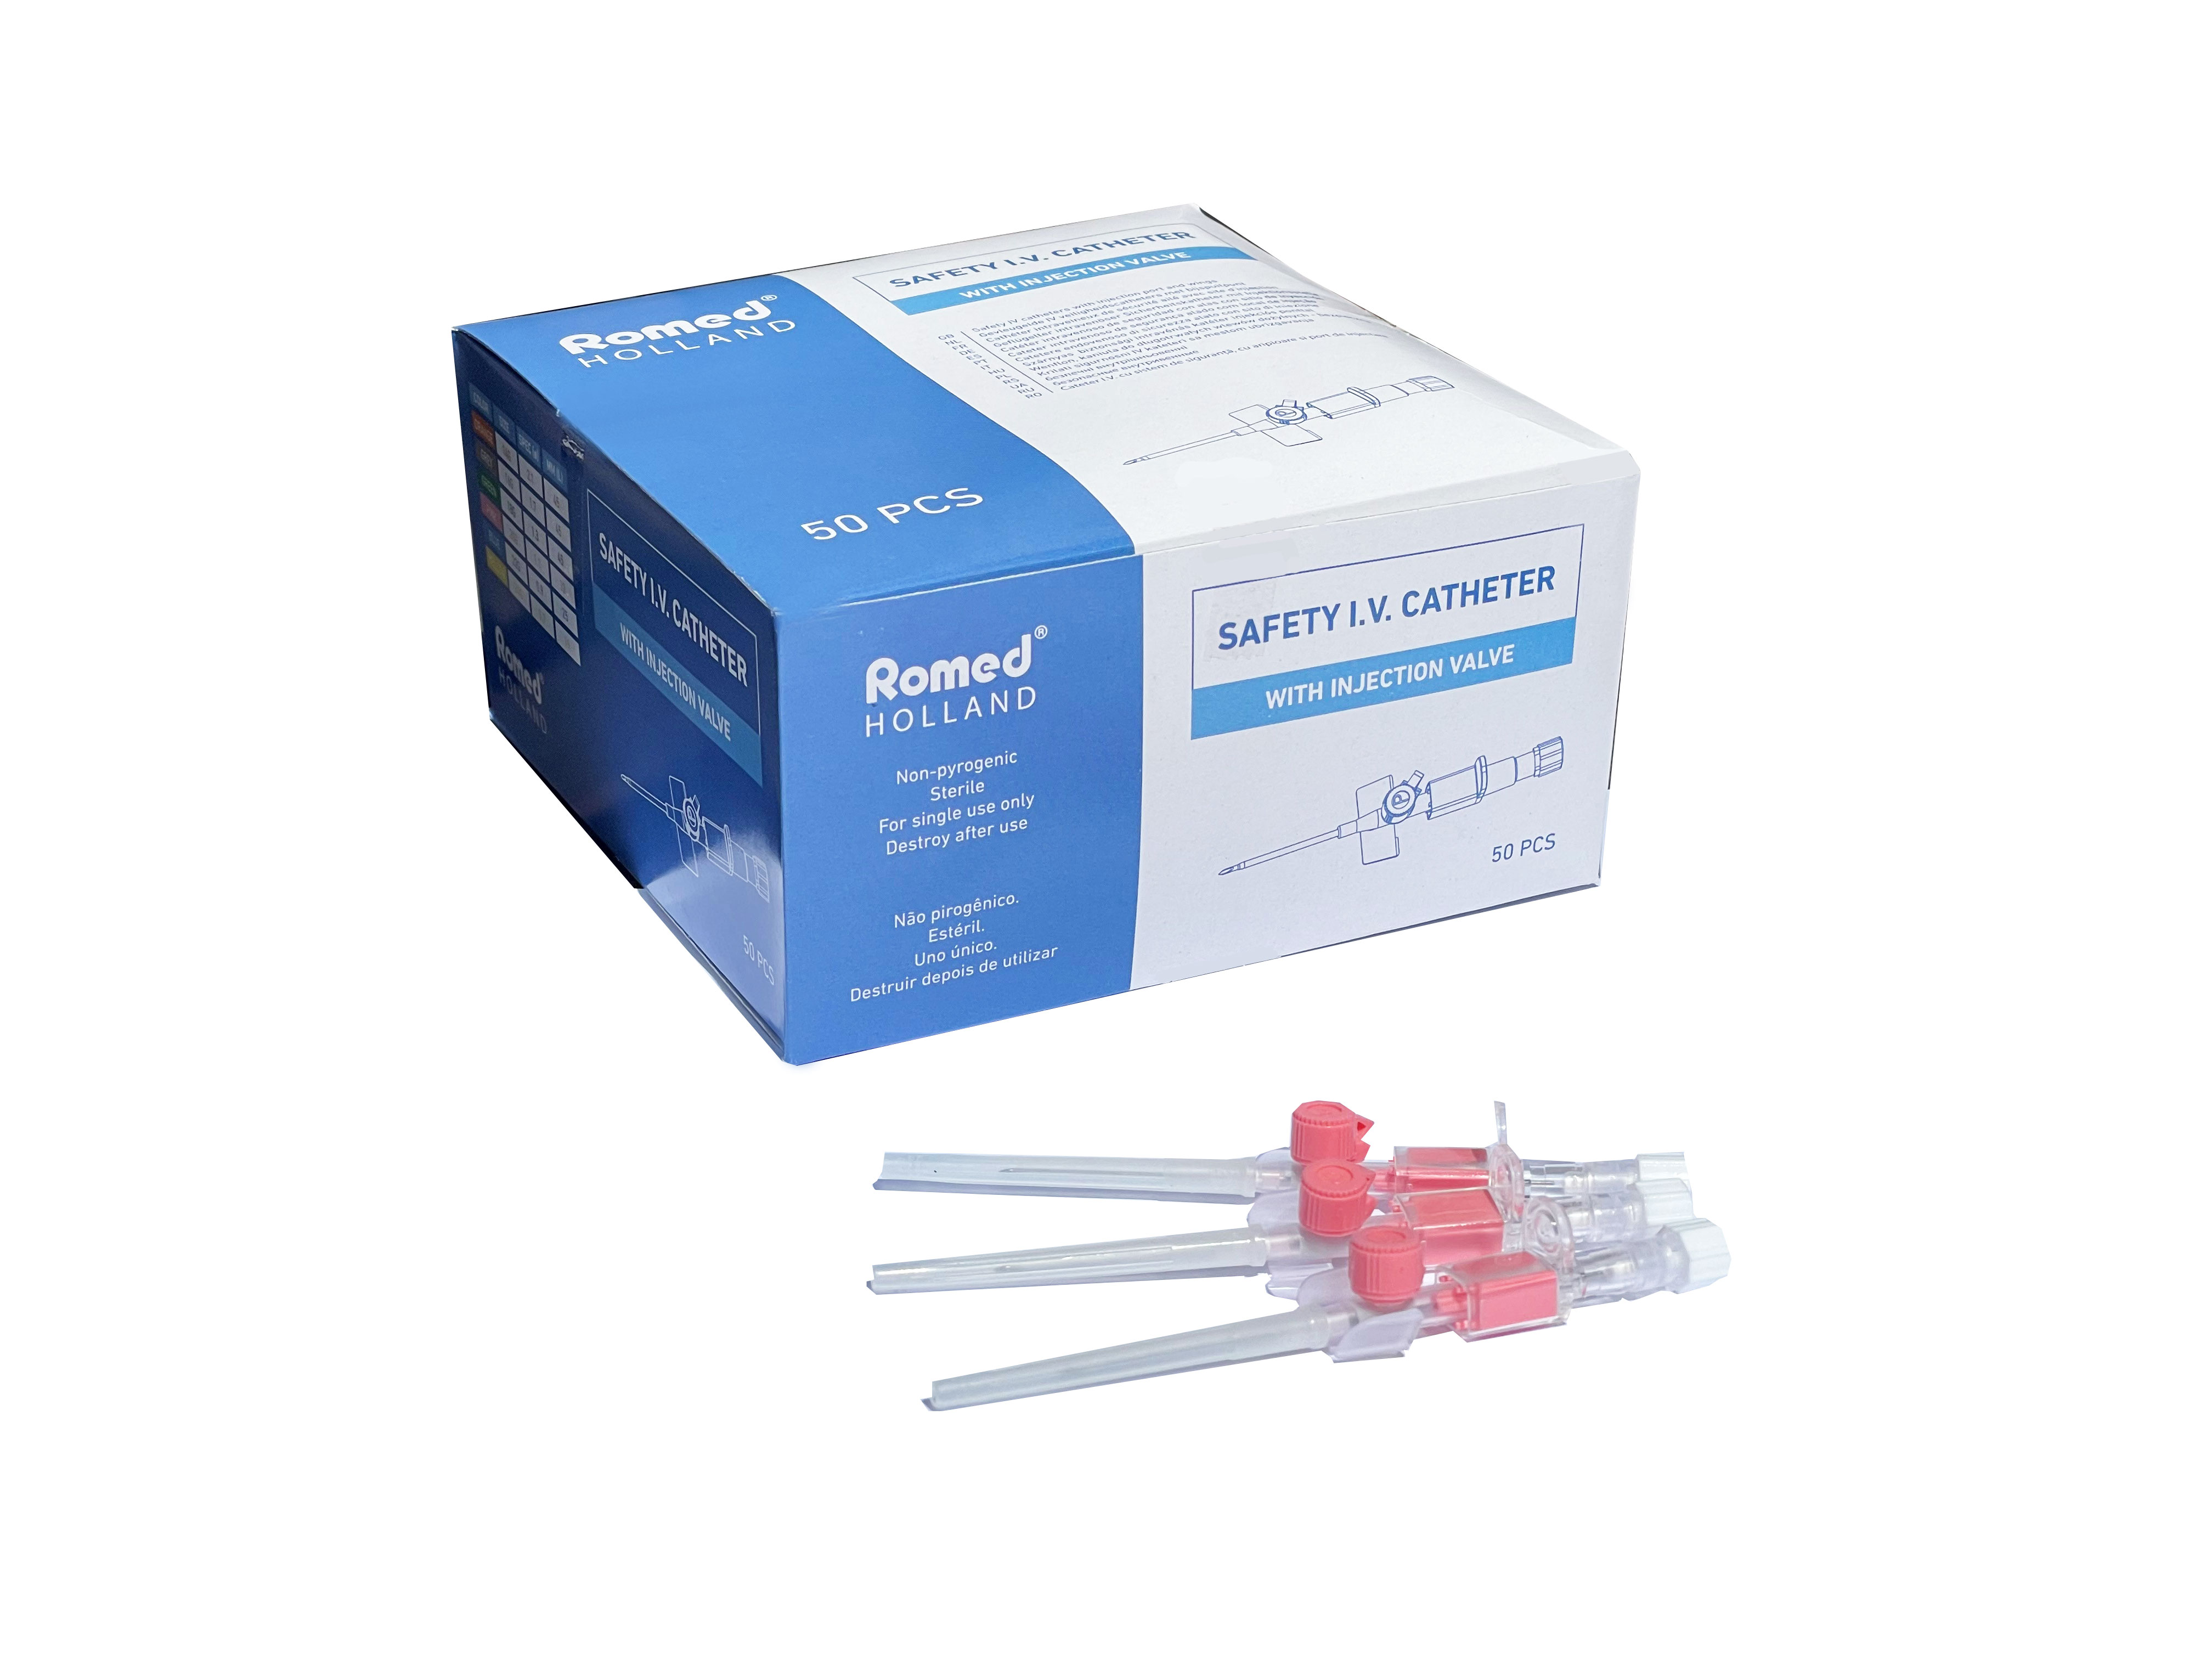 S-IVCATH-18G Romed Safety I.V. catheters with injection valve, 18G, sterile per piece, 50 pcs in an inner box, 10 x 50 pcs = 500 pcs in a carton.